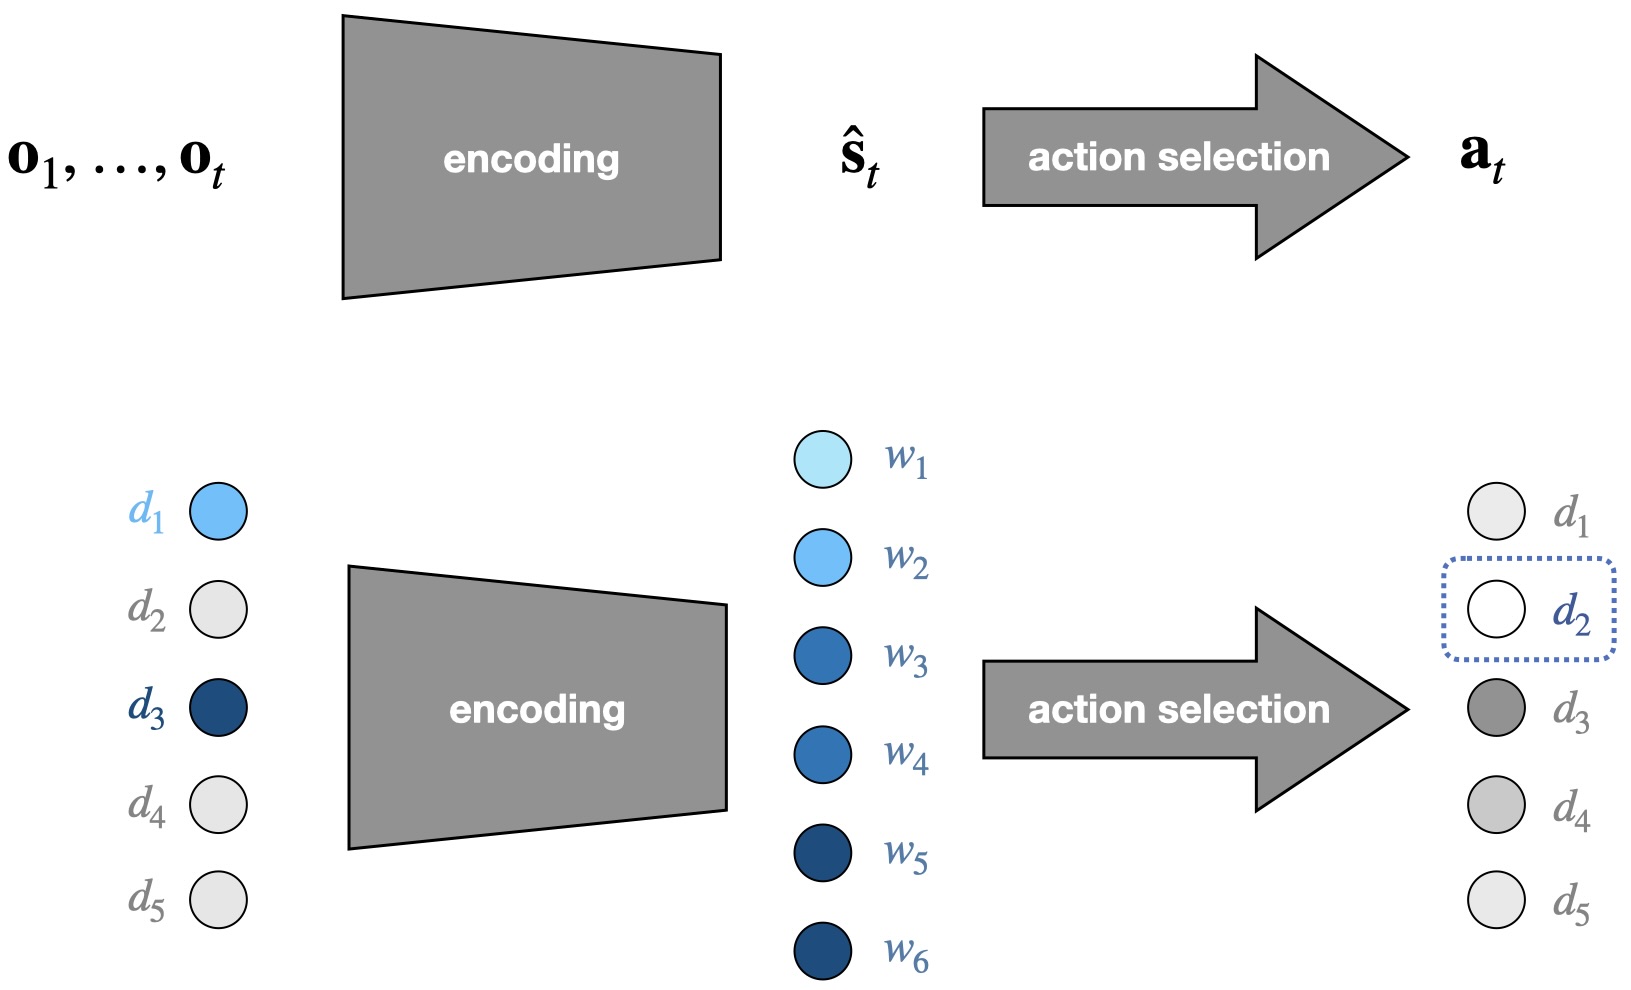 Up, the common architecture from observations to latent state and action. Down, our adaptation with keywords as latent state and documents as action.